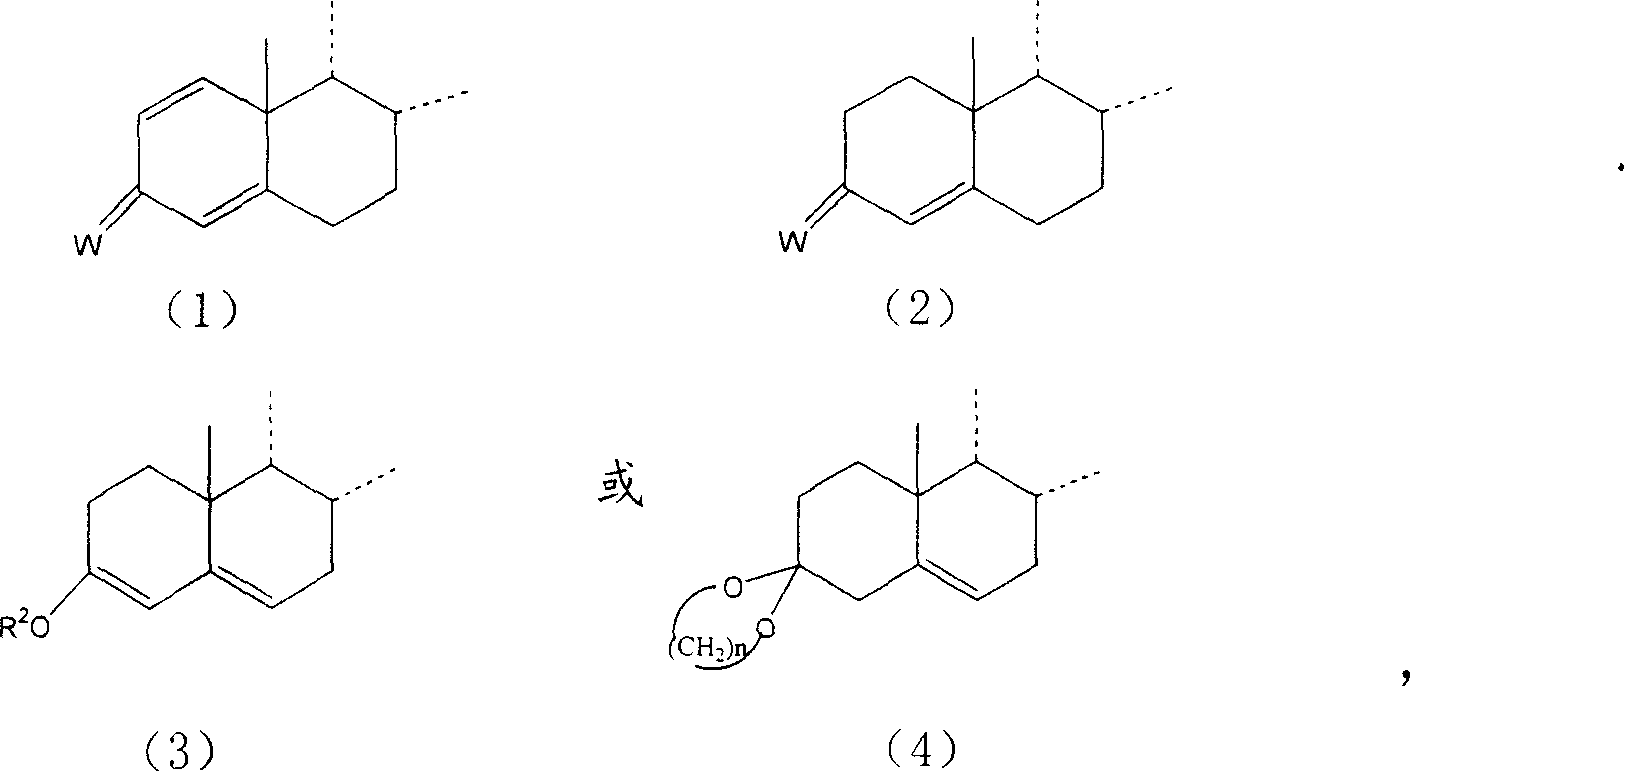 Novel steroid compound and uses thereof